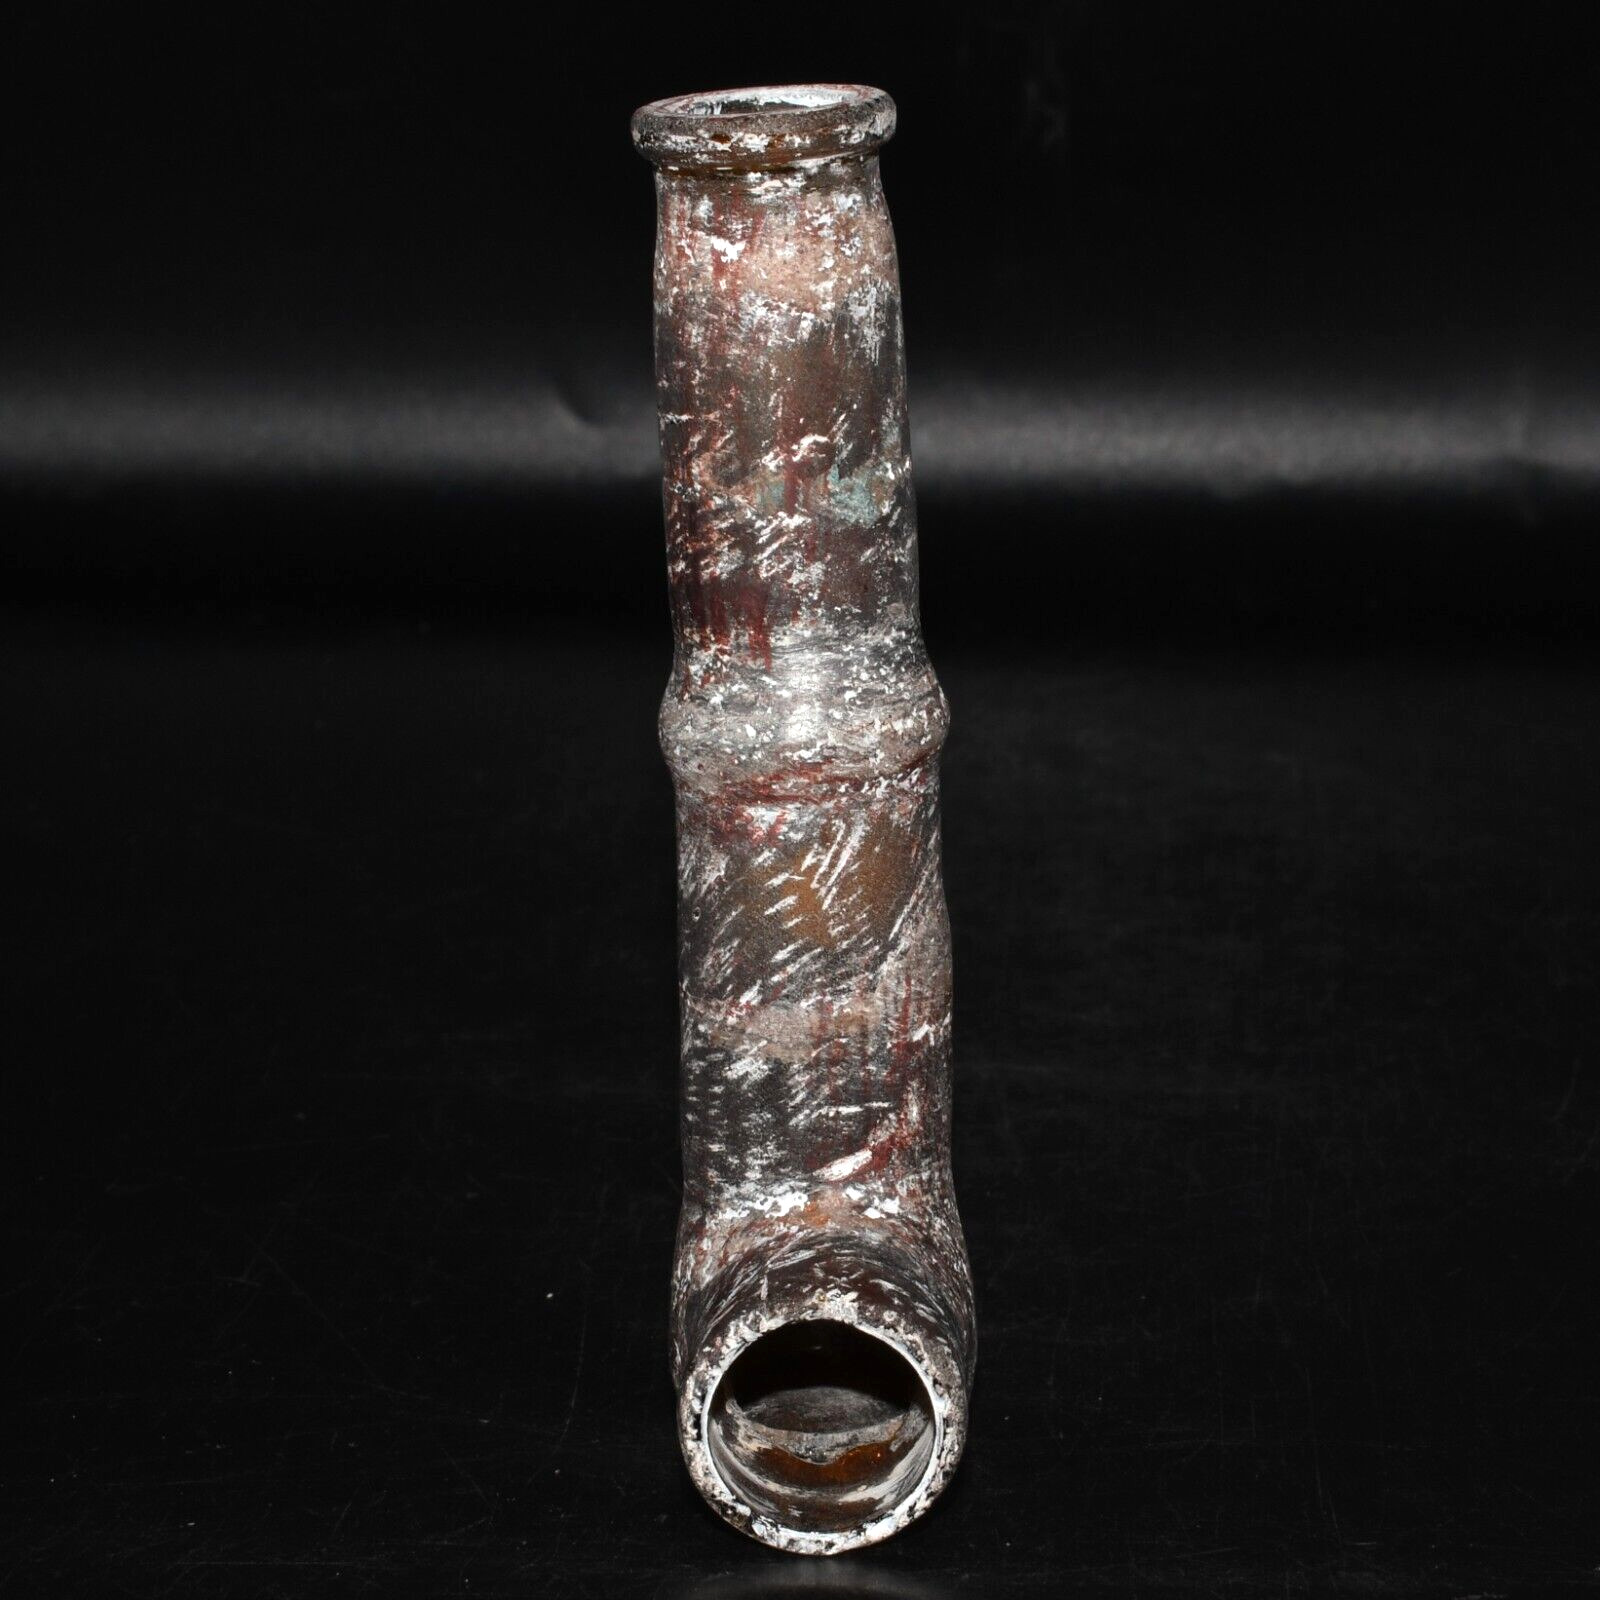 Intact Ancient Islamic Glass Medical Vessel in Good Condition Ca. 7th Century AD